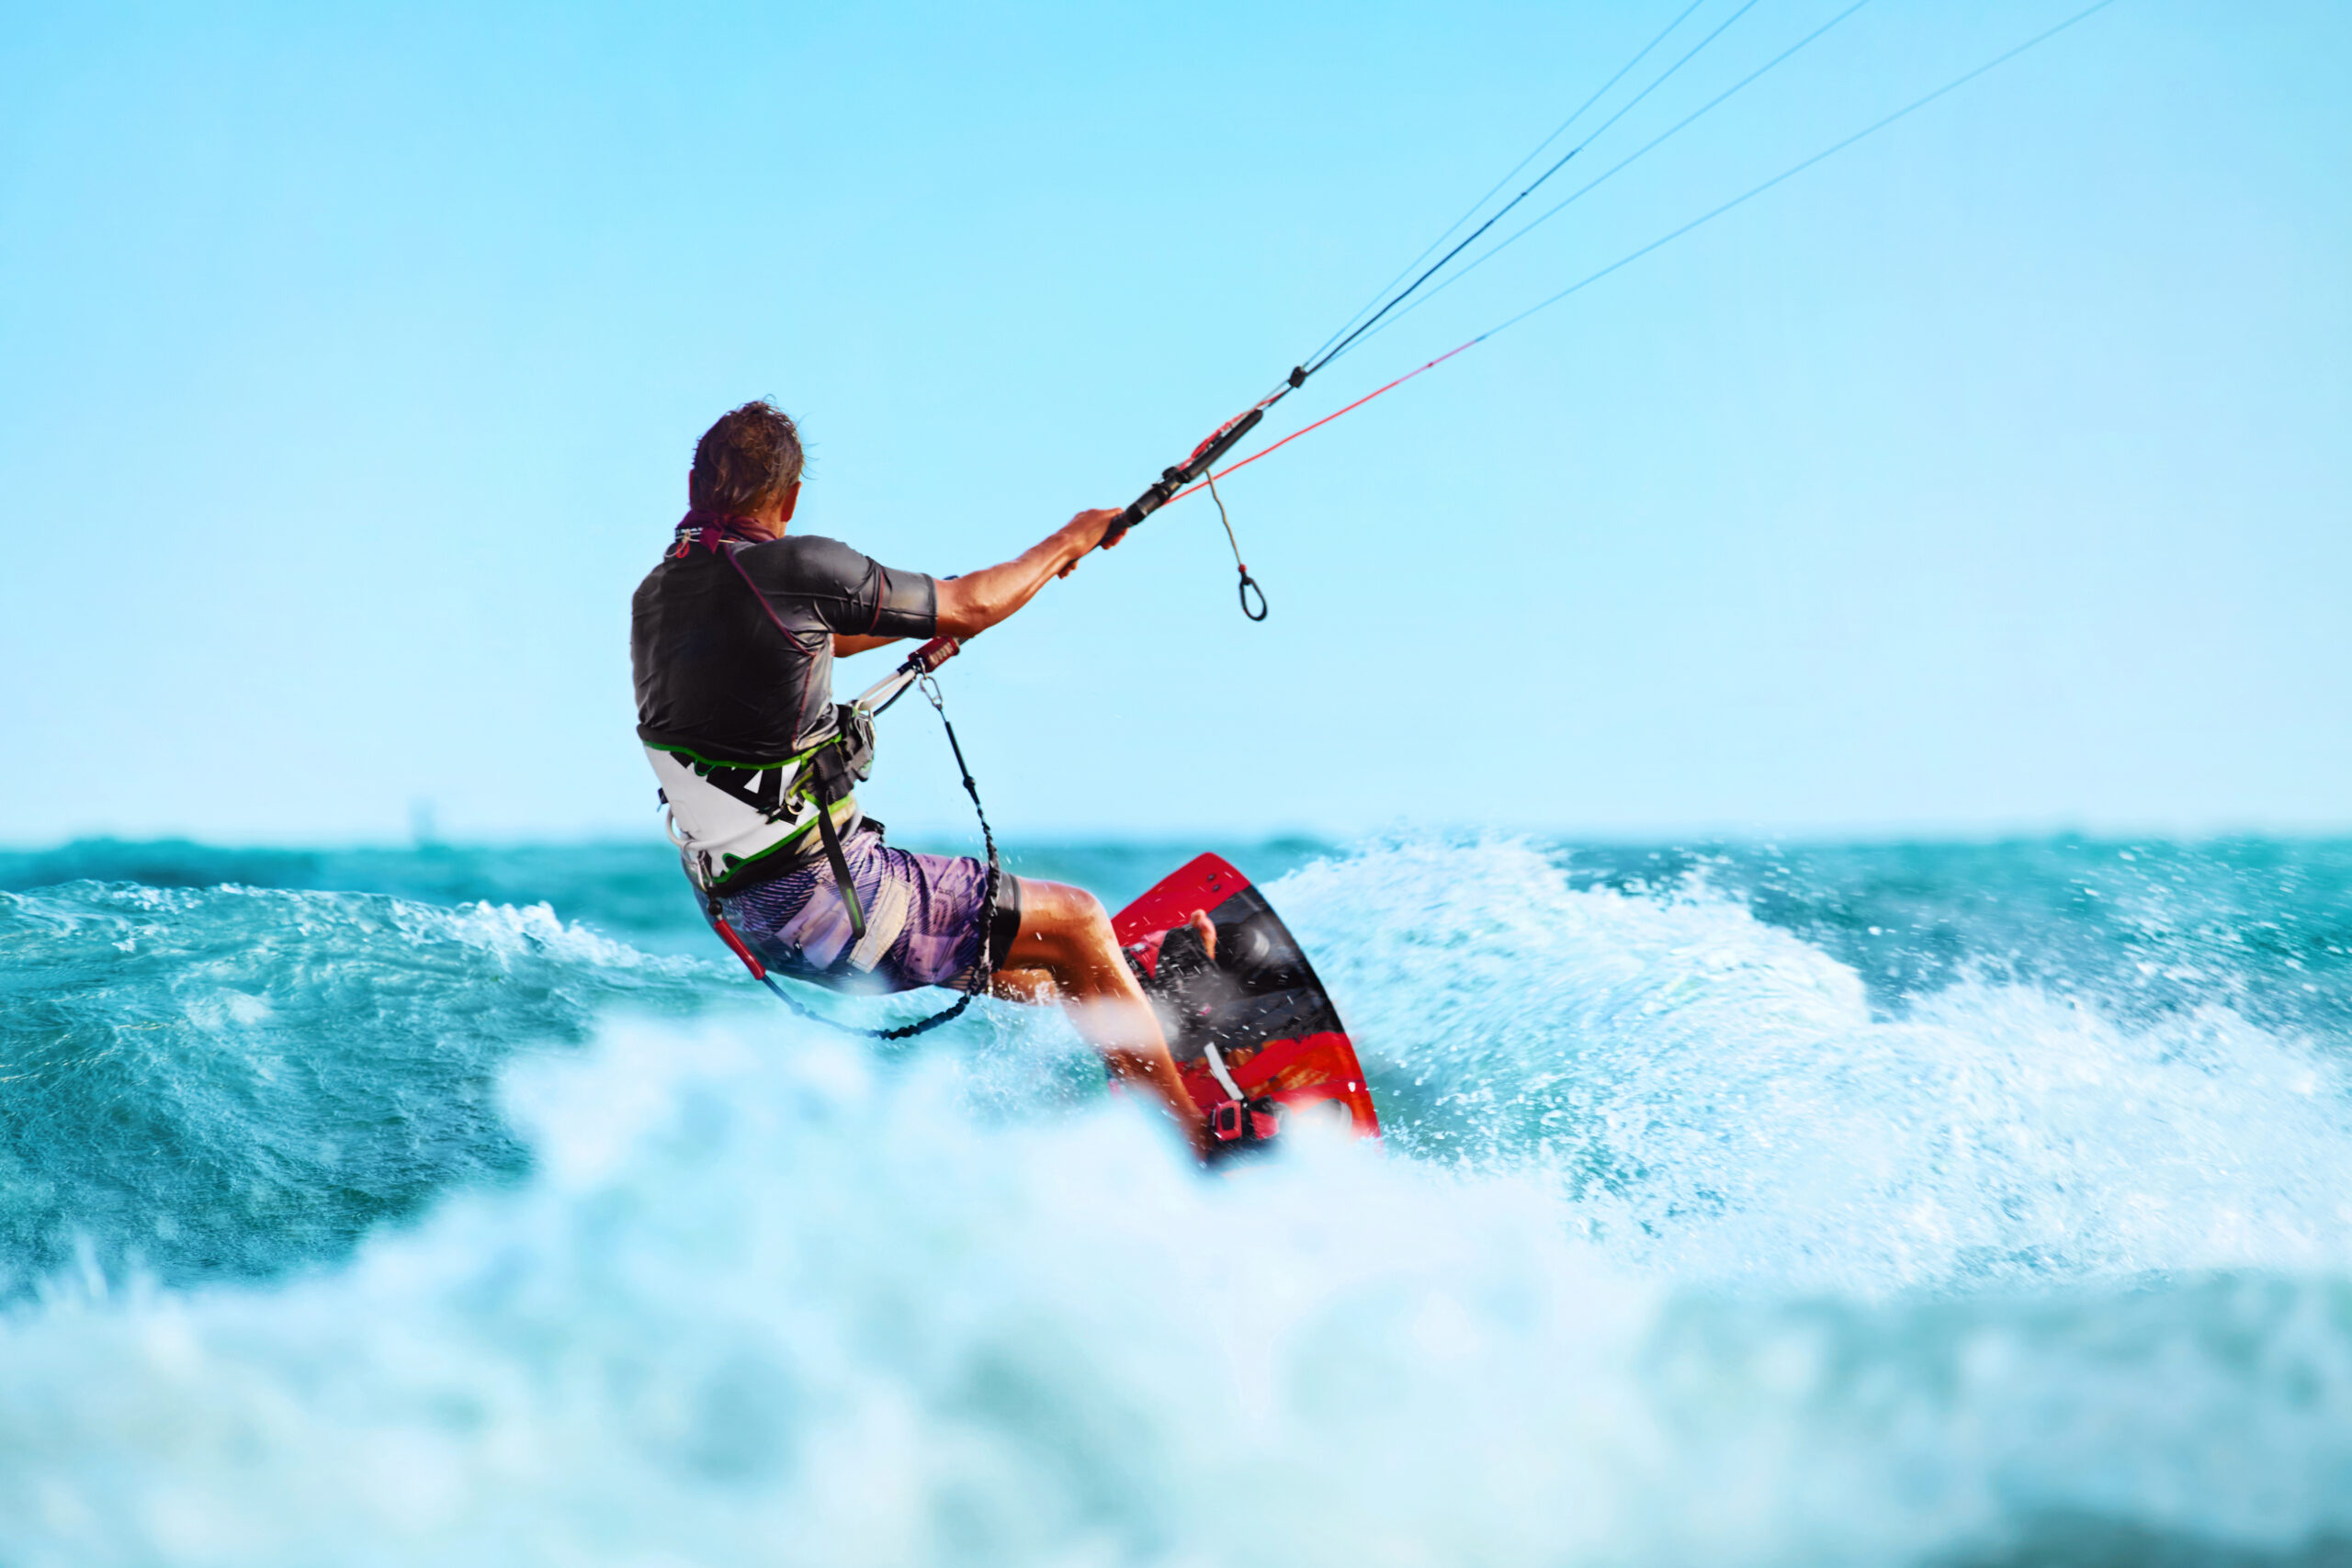 Kiteboarding, Kitesurfing. Water Sports. Professional Kite Surfer In Action On Waves In Ocean. Extreme Sport. Healthy Active Lifestyle. Hobby. Recreational Sporting Activity. Summer Fun, Adventure - Crédits : puhhha